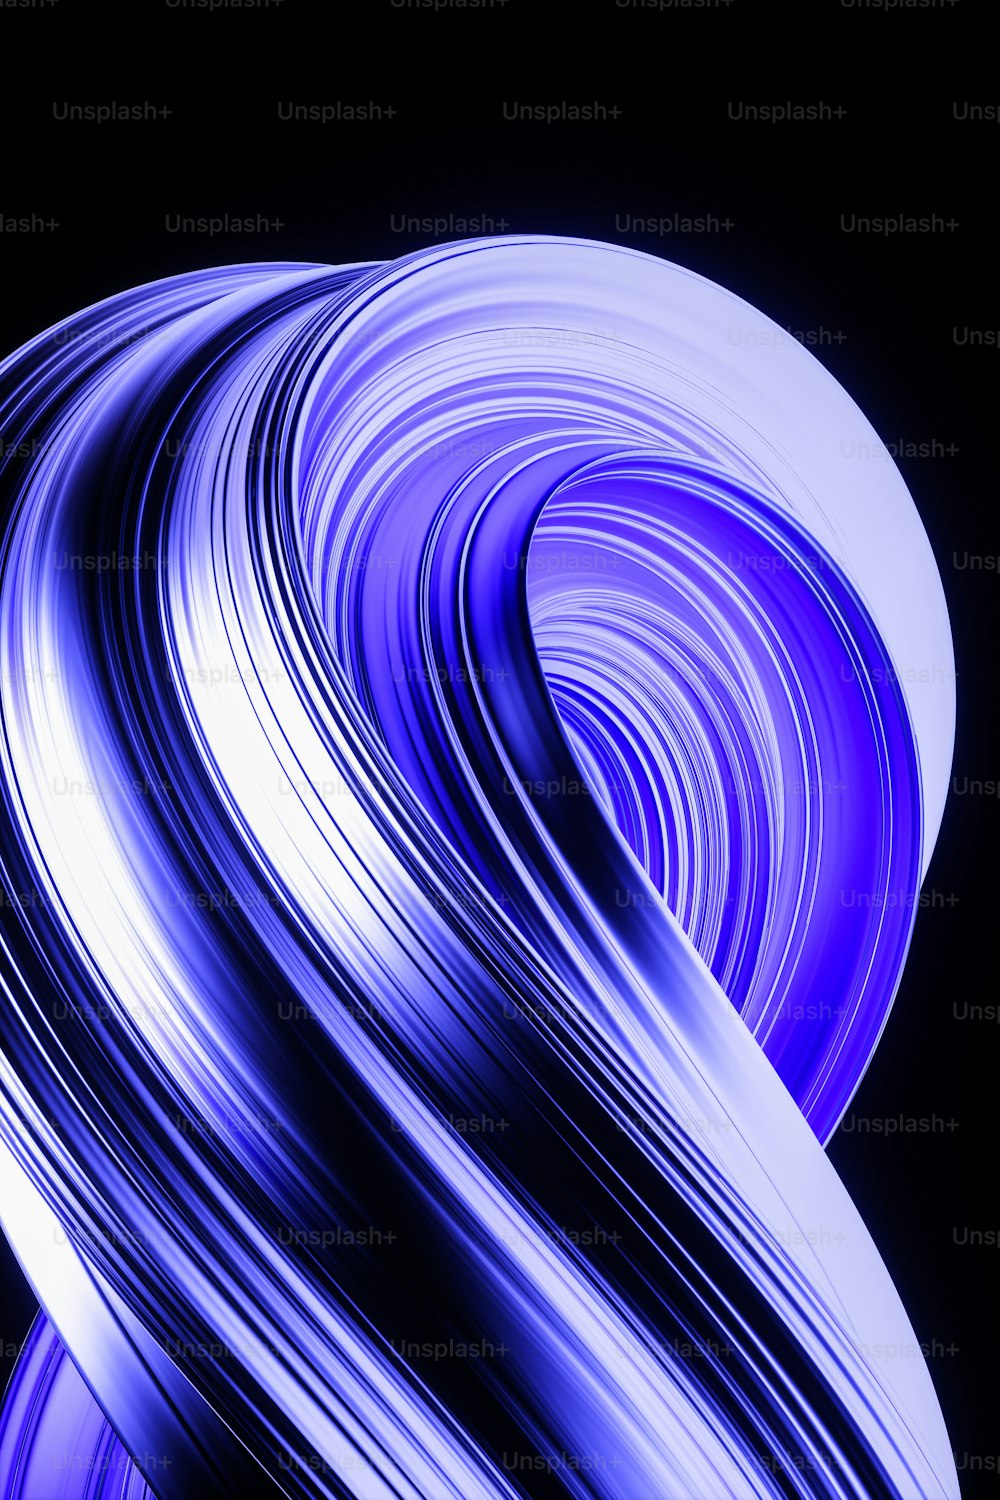 a blue and white swirl on a black background